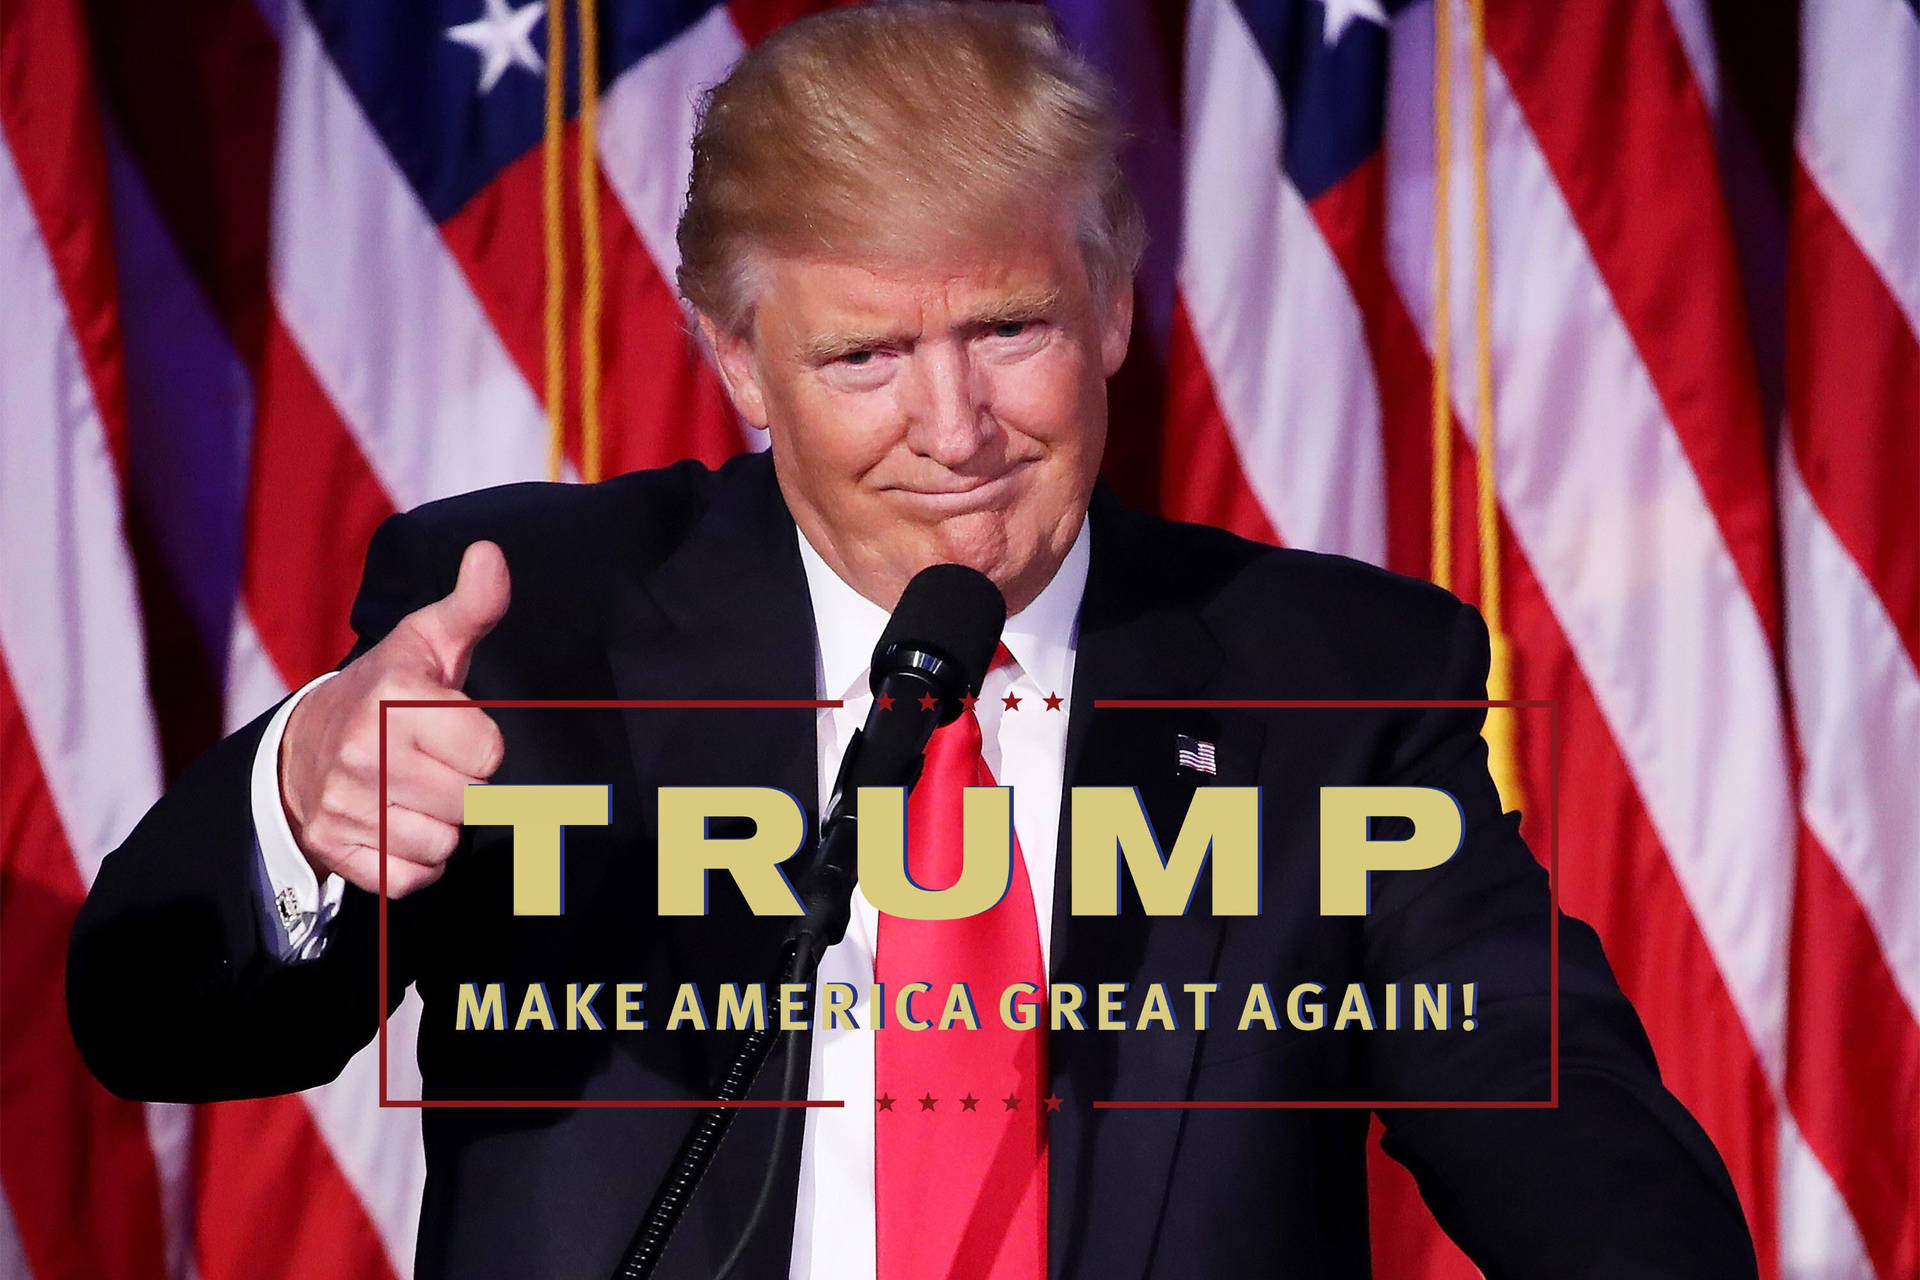 1920x1280 50 Trump Wallpapers \u0026 Backgrounds For FREE